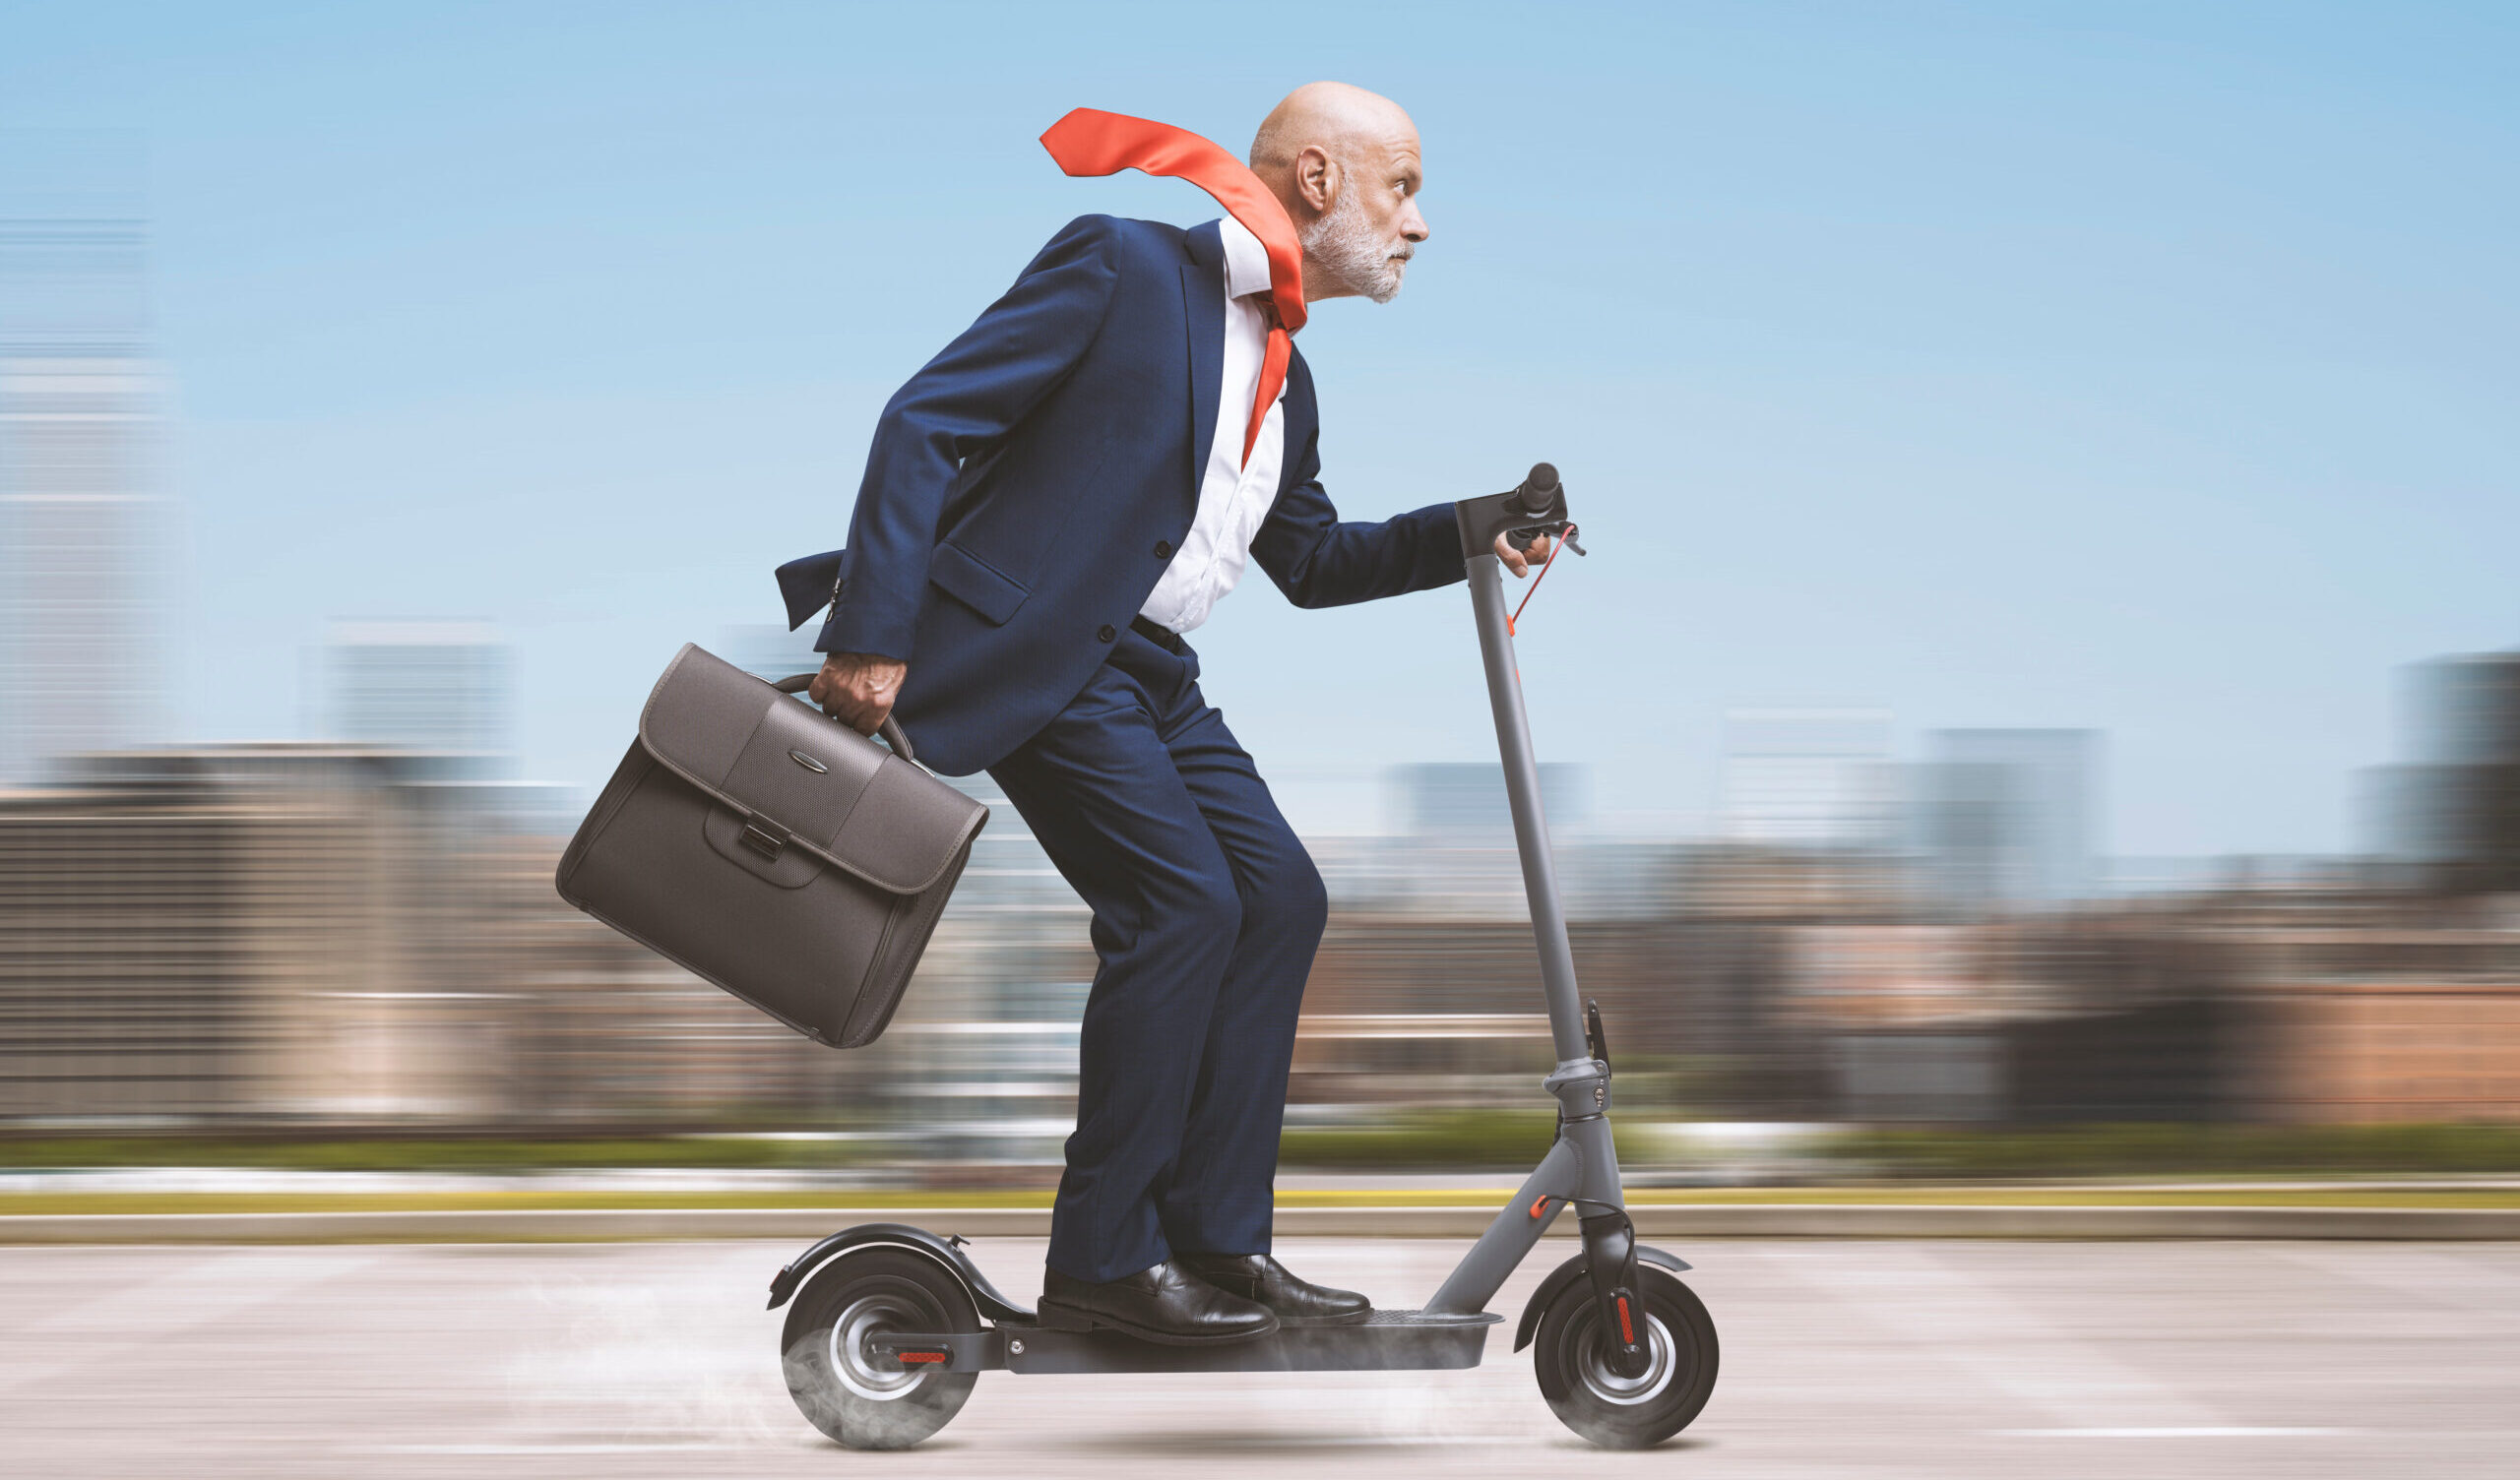 Corporate Businessman Riding A Scooter